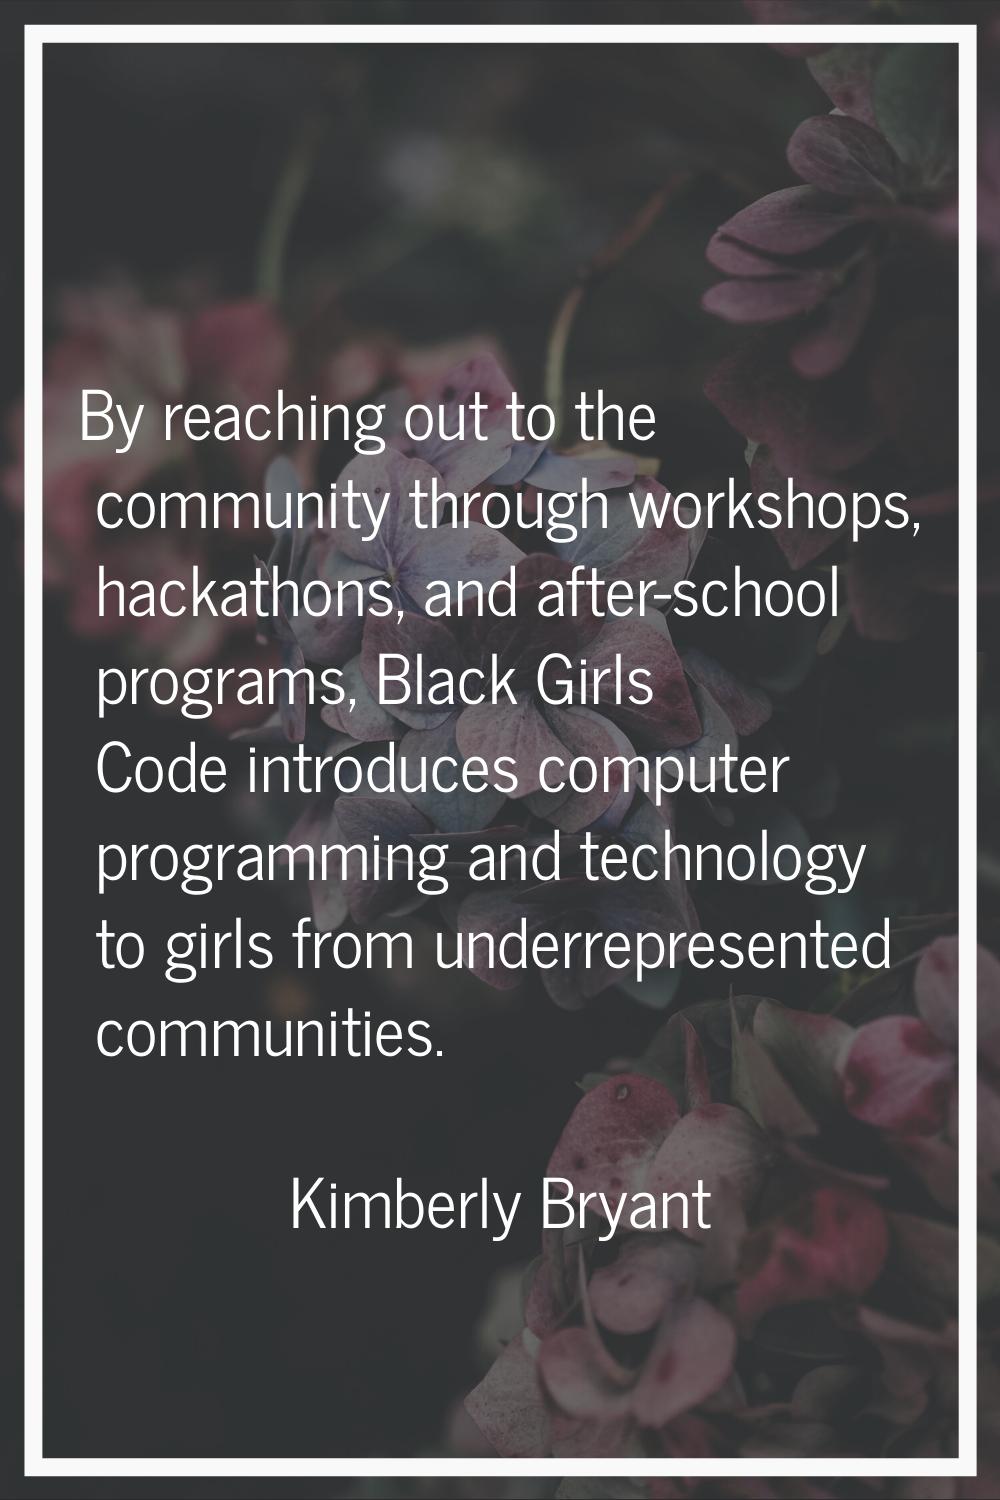 By reaching out to the community through workshops, hackathons, and after-school programs, Black Gi